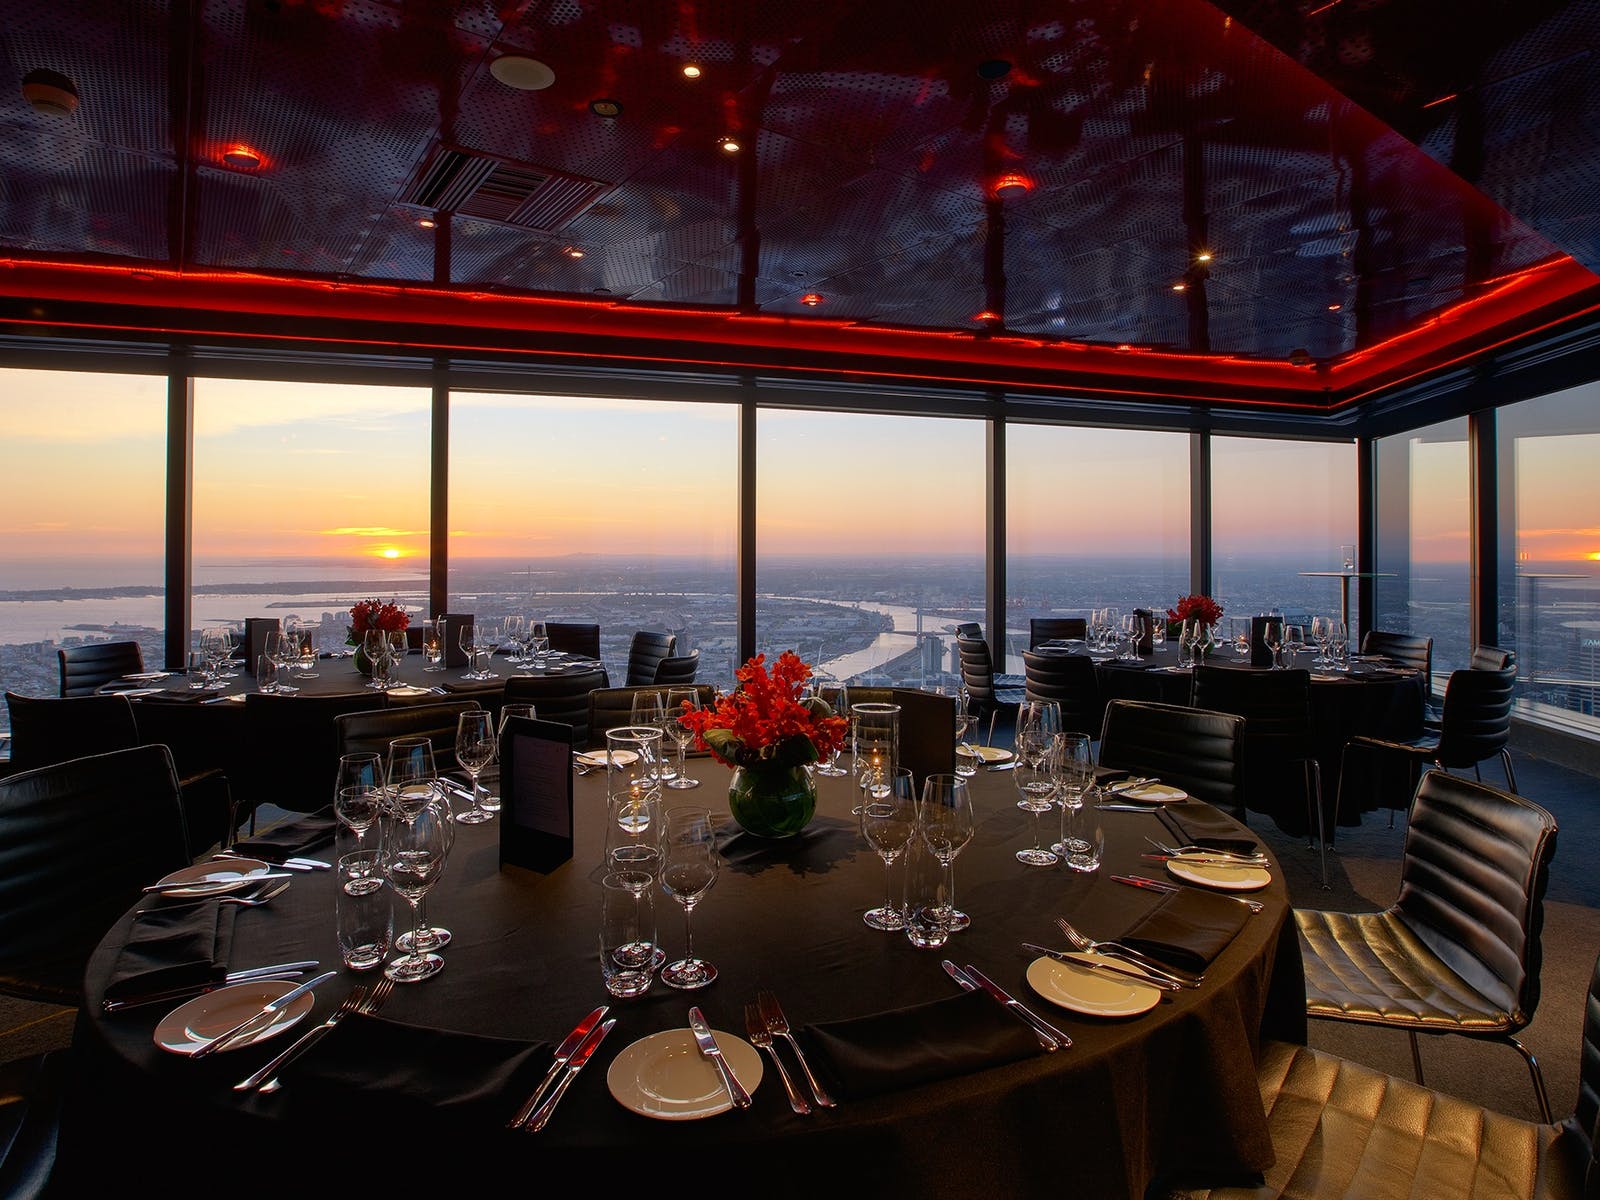 Soak in the panoramic view over Melbourne while enjoying diverse dishes at vibrant Eureka 89